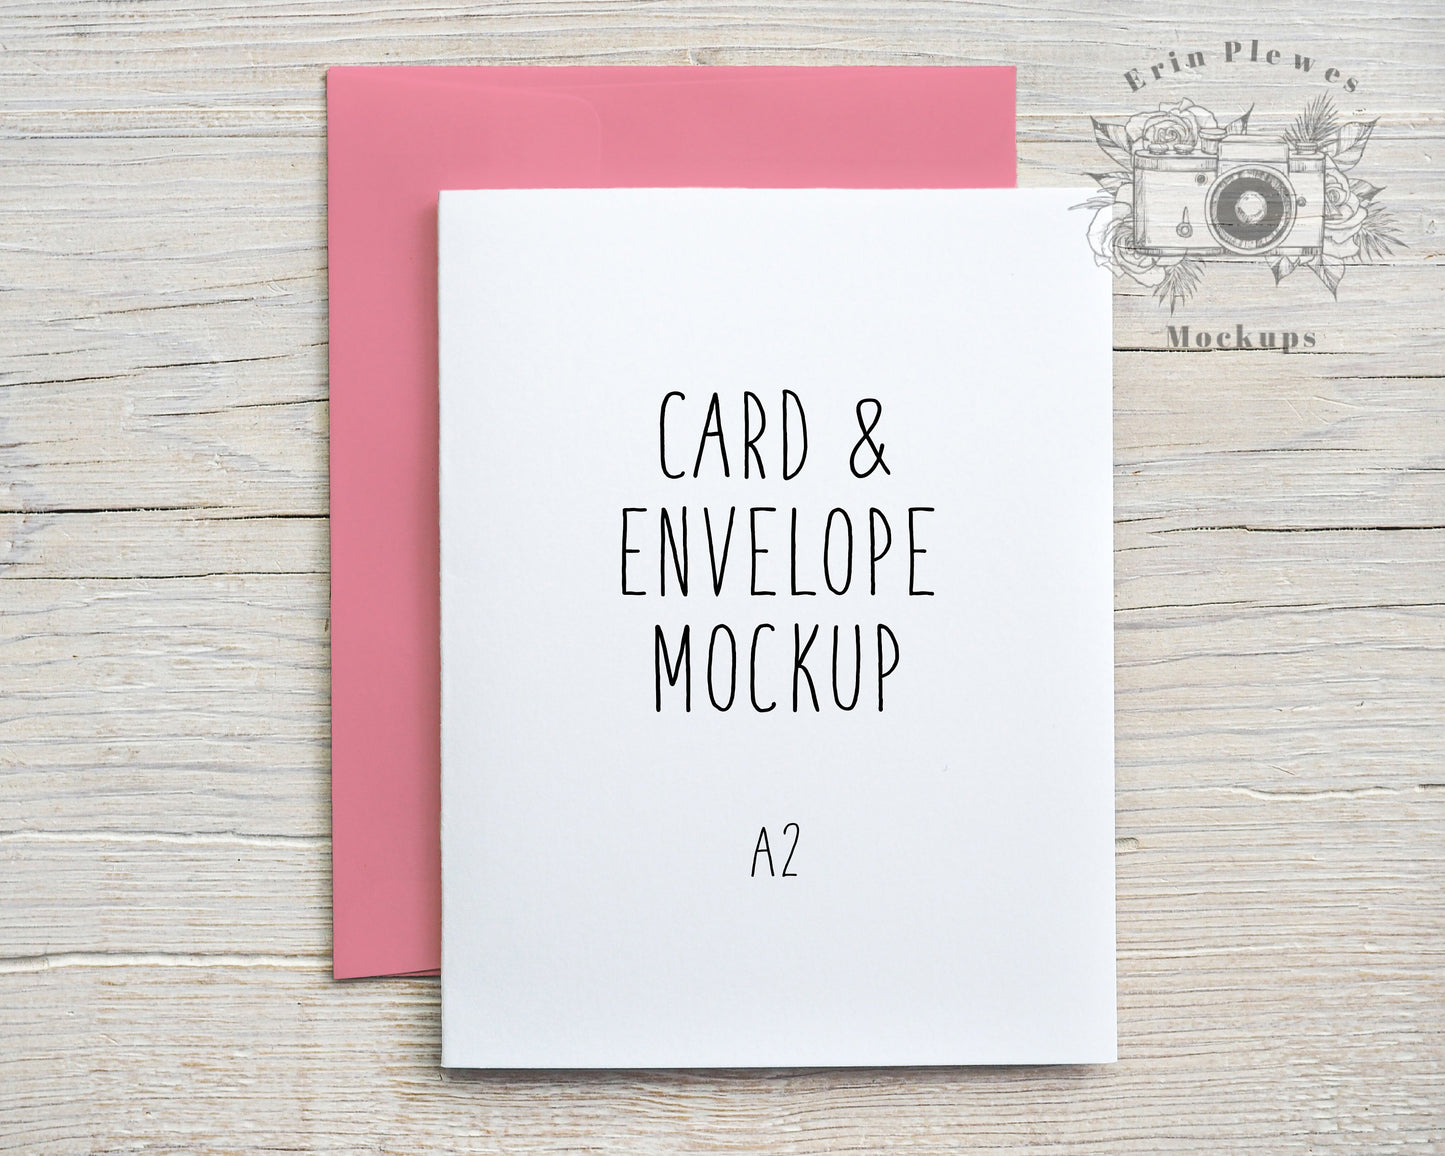 A2 Card Mockup with Pink Envelope, Greeting Card Mock-up for Valentine&#39;s Day, Vertical Card Lifestyle Photo, Jpeg Instant Digital Download